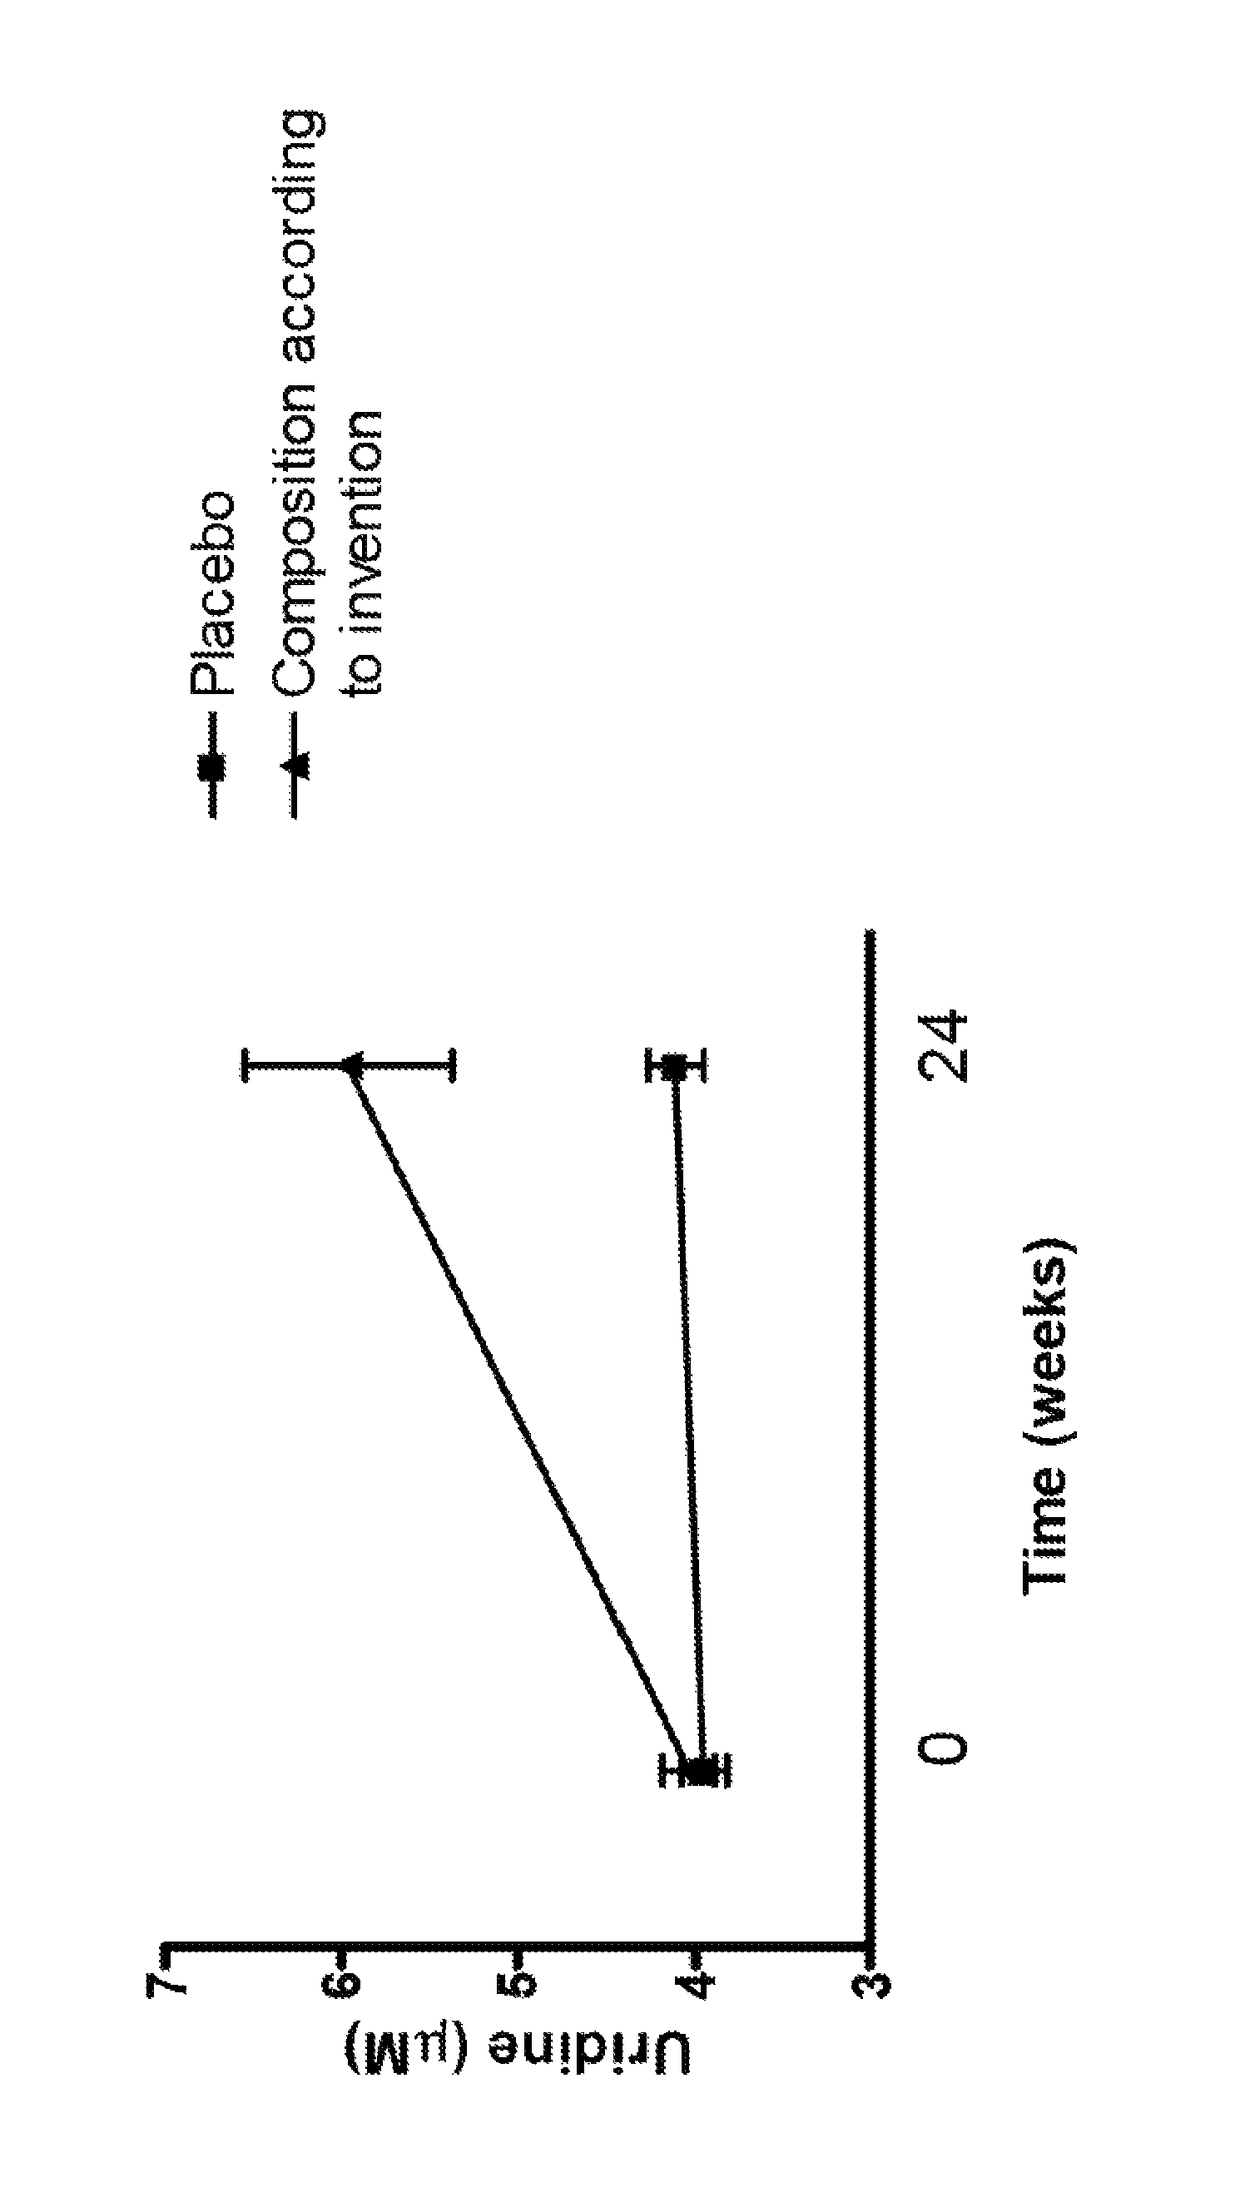 Product and method for supporting uridine homeostasis